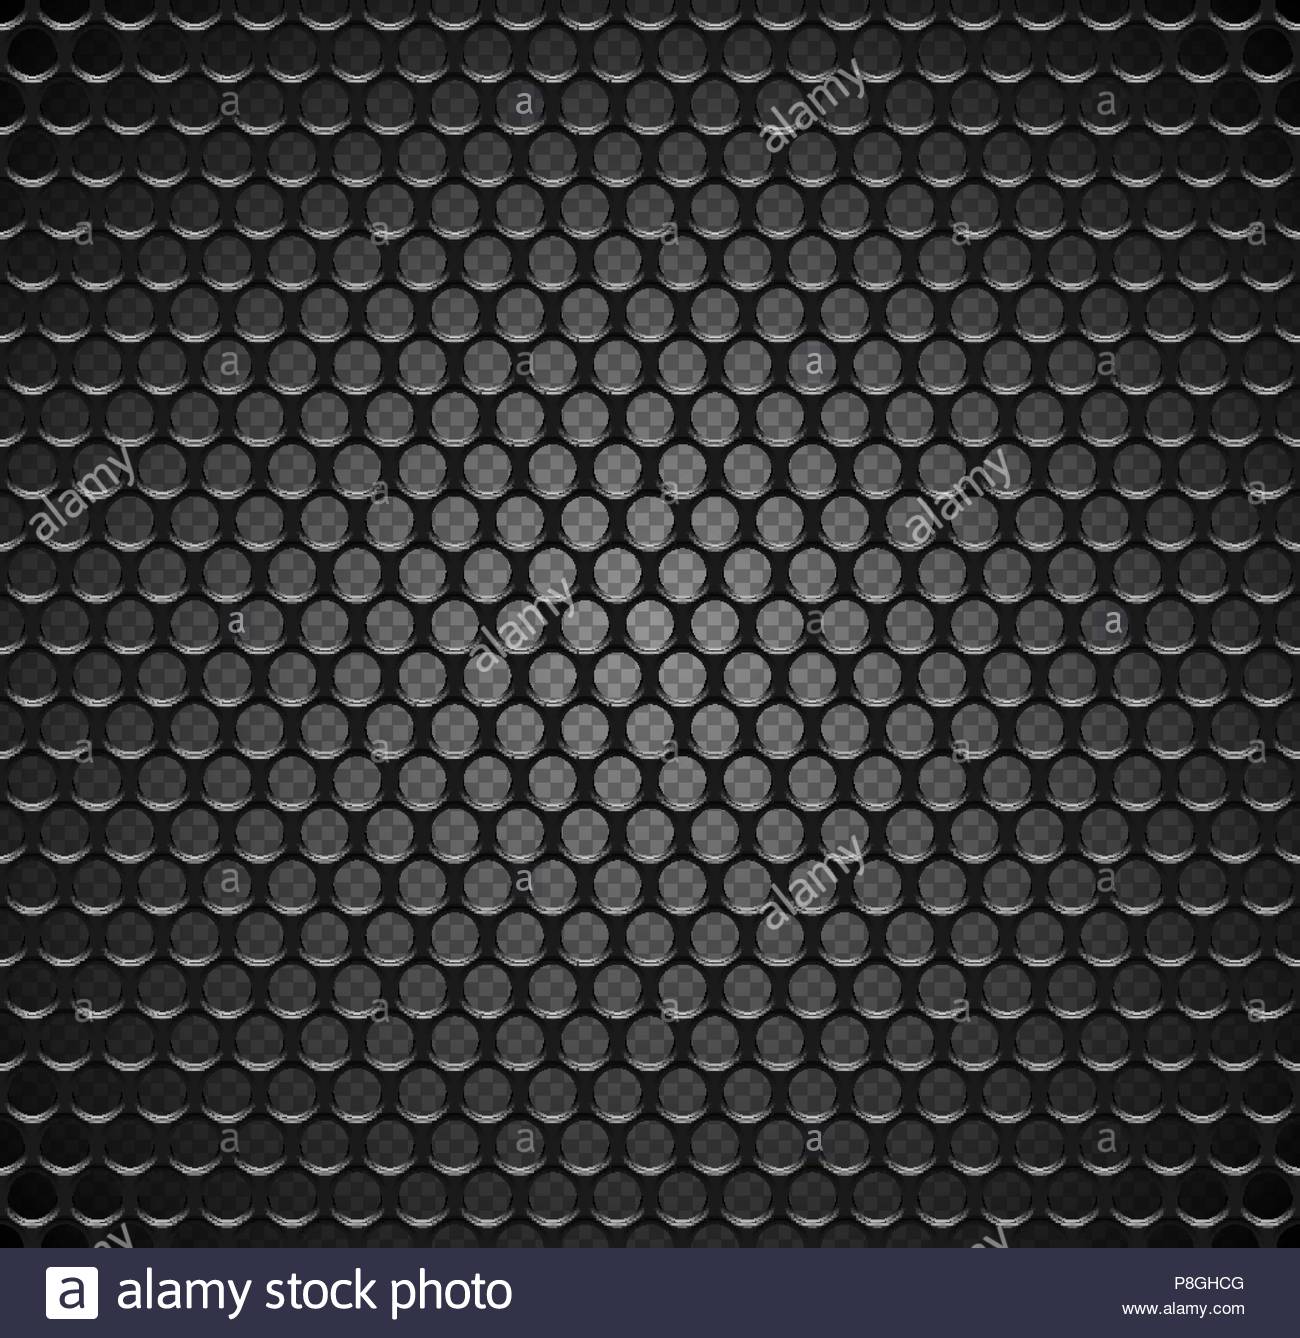 Vector Metal Grid Seamless Pattern On Transparent Background